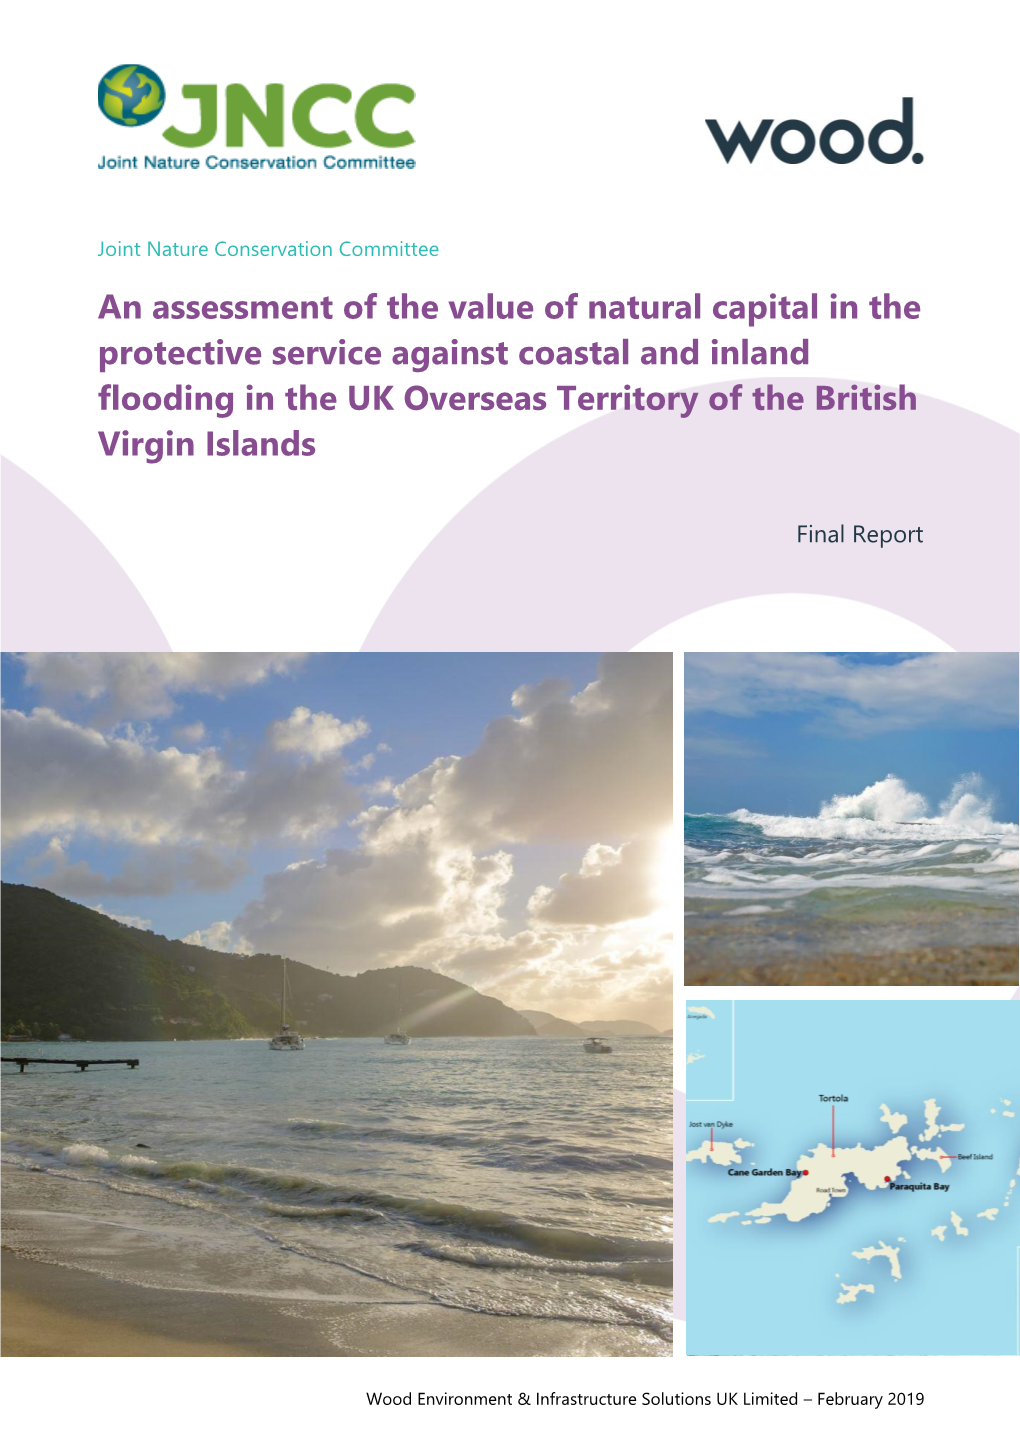 An Assessment of the Value of Natural Capital in the Protective Service Against Coastal and Inland Flooding in the UK Overseas Territory of the British